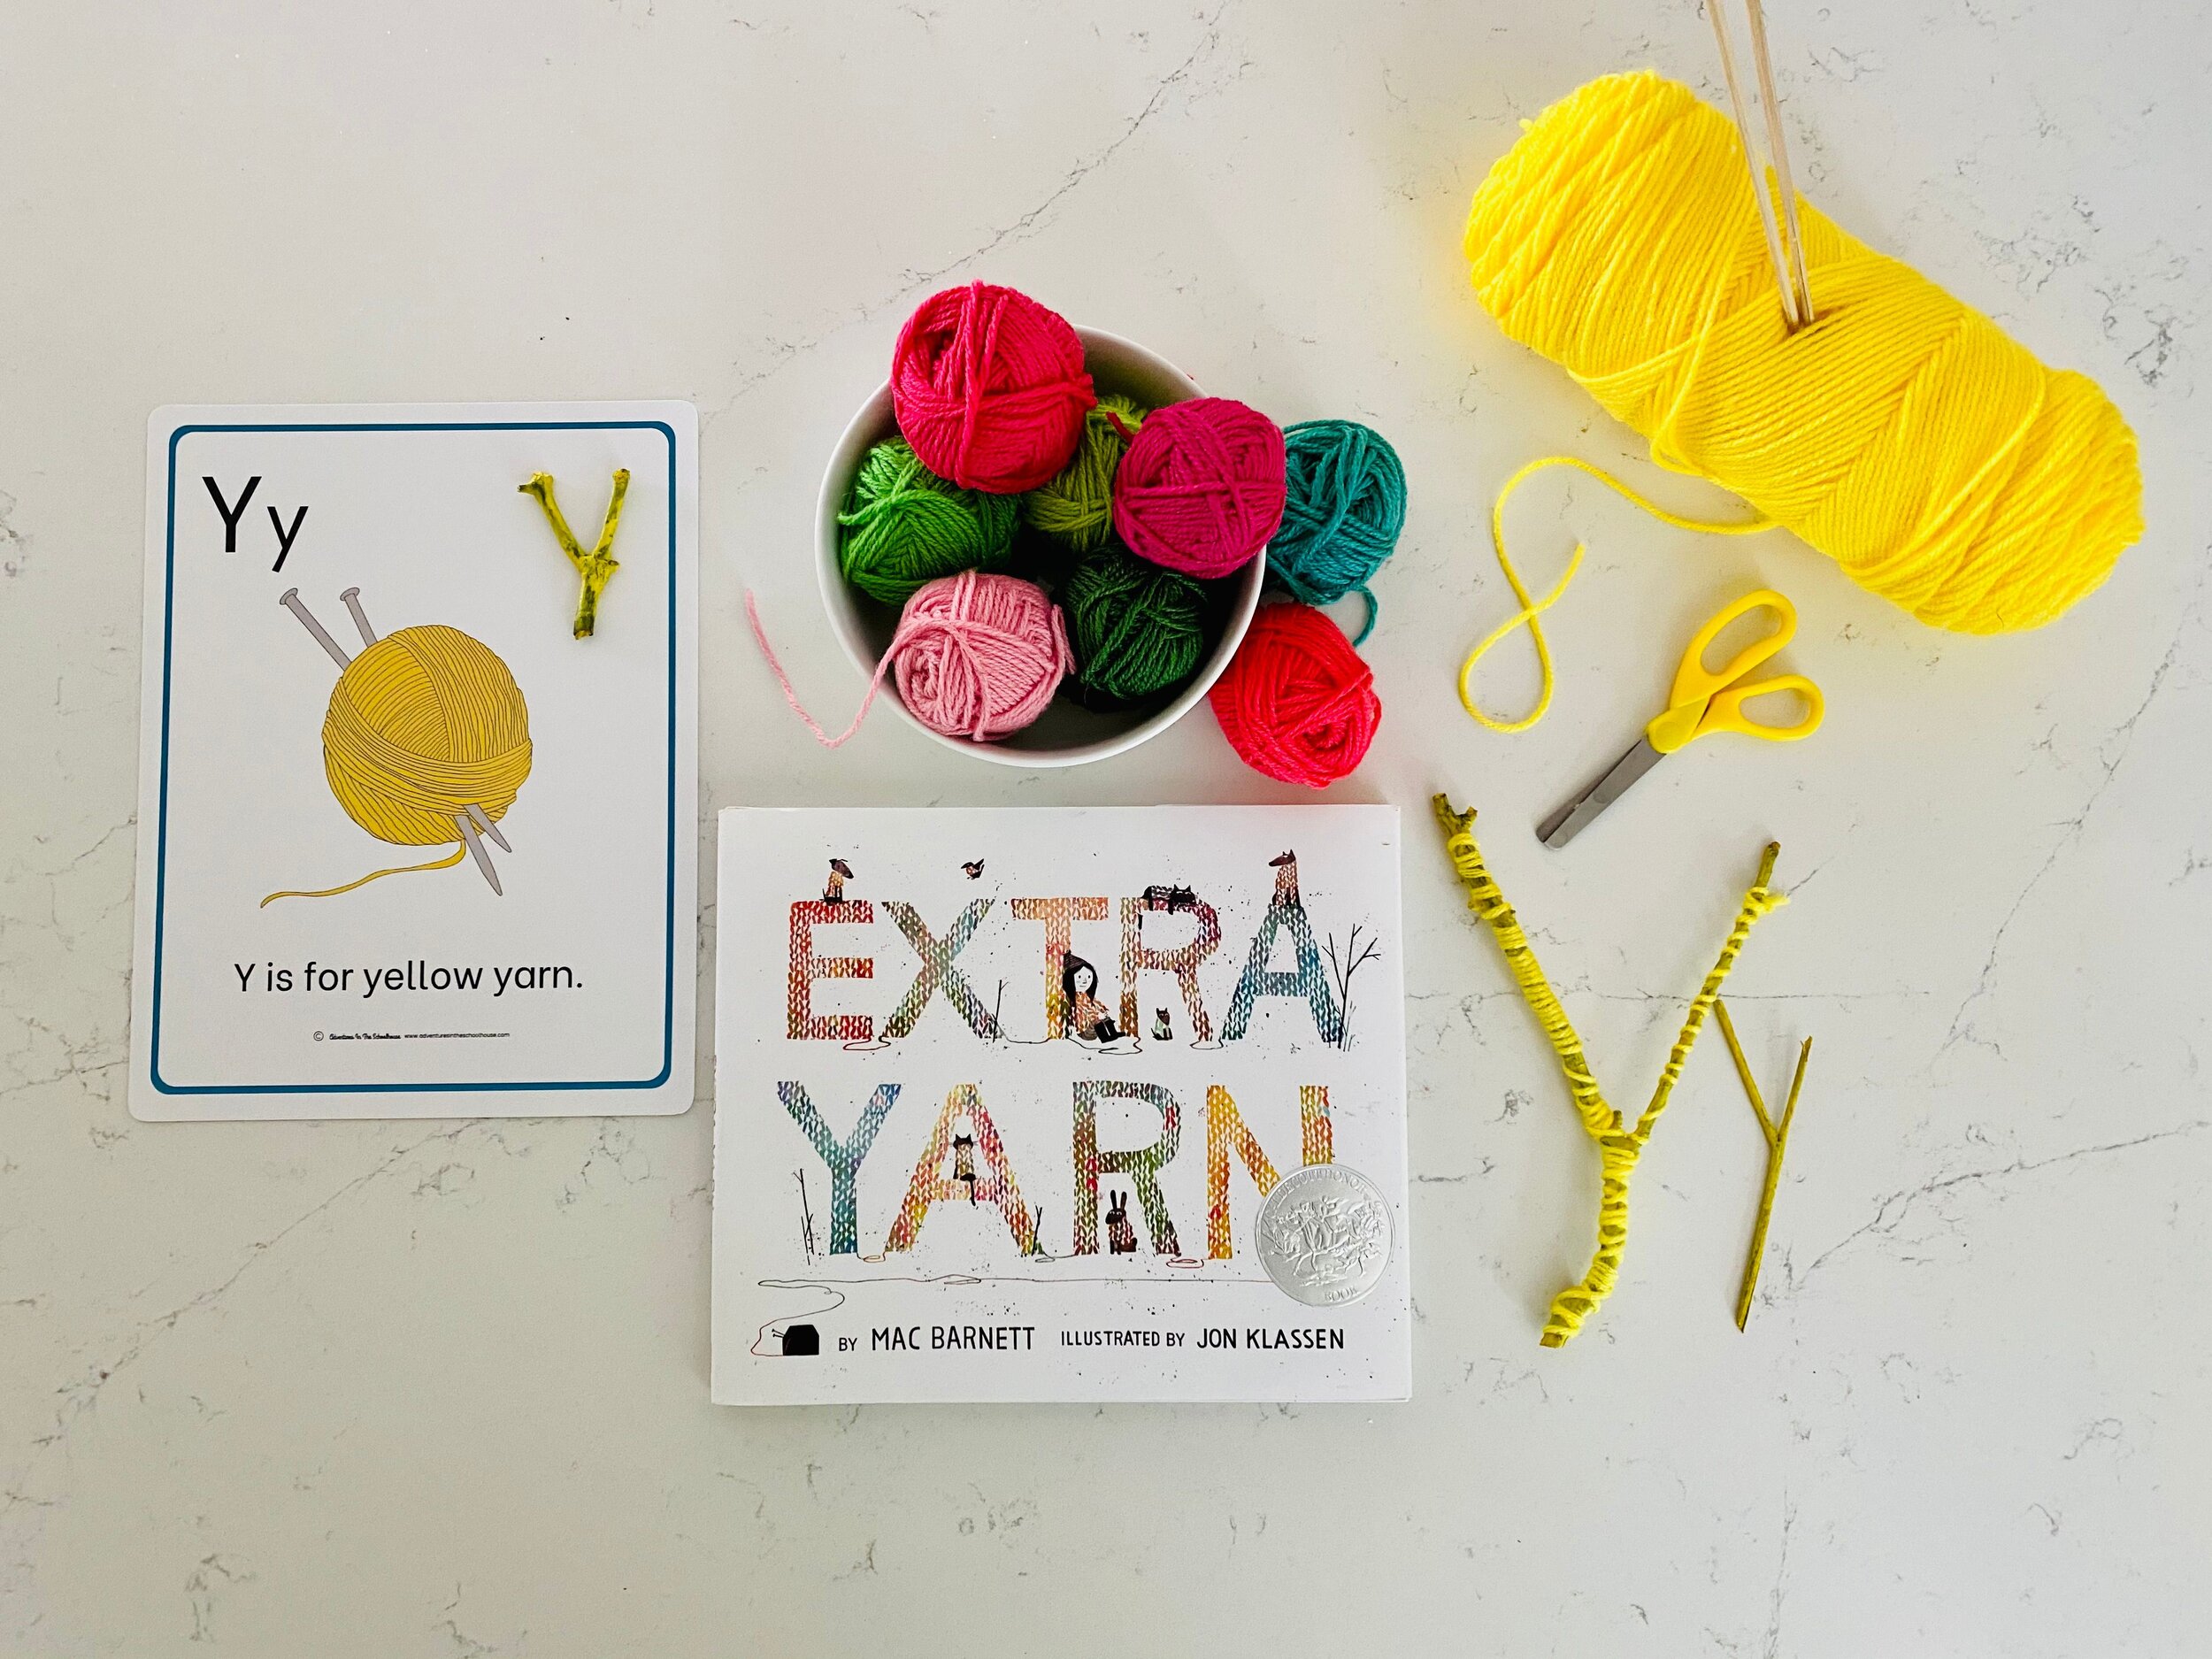 Y” the Extra Yarn? — Adventures in the Schoolhouse